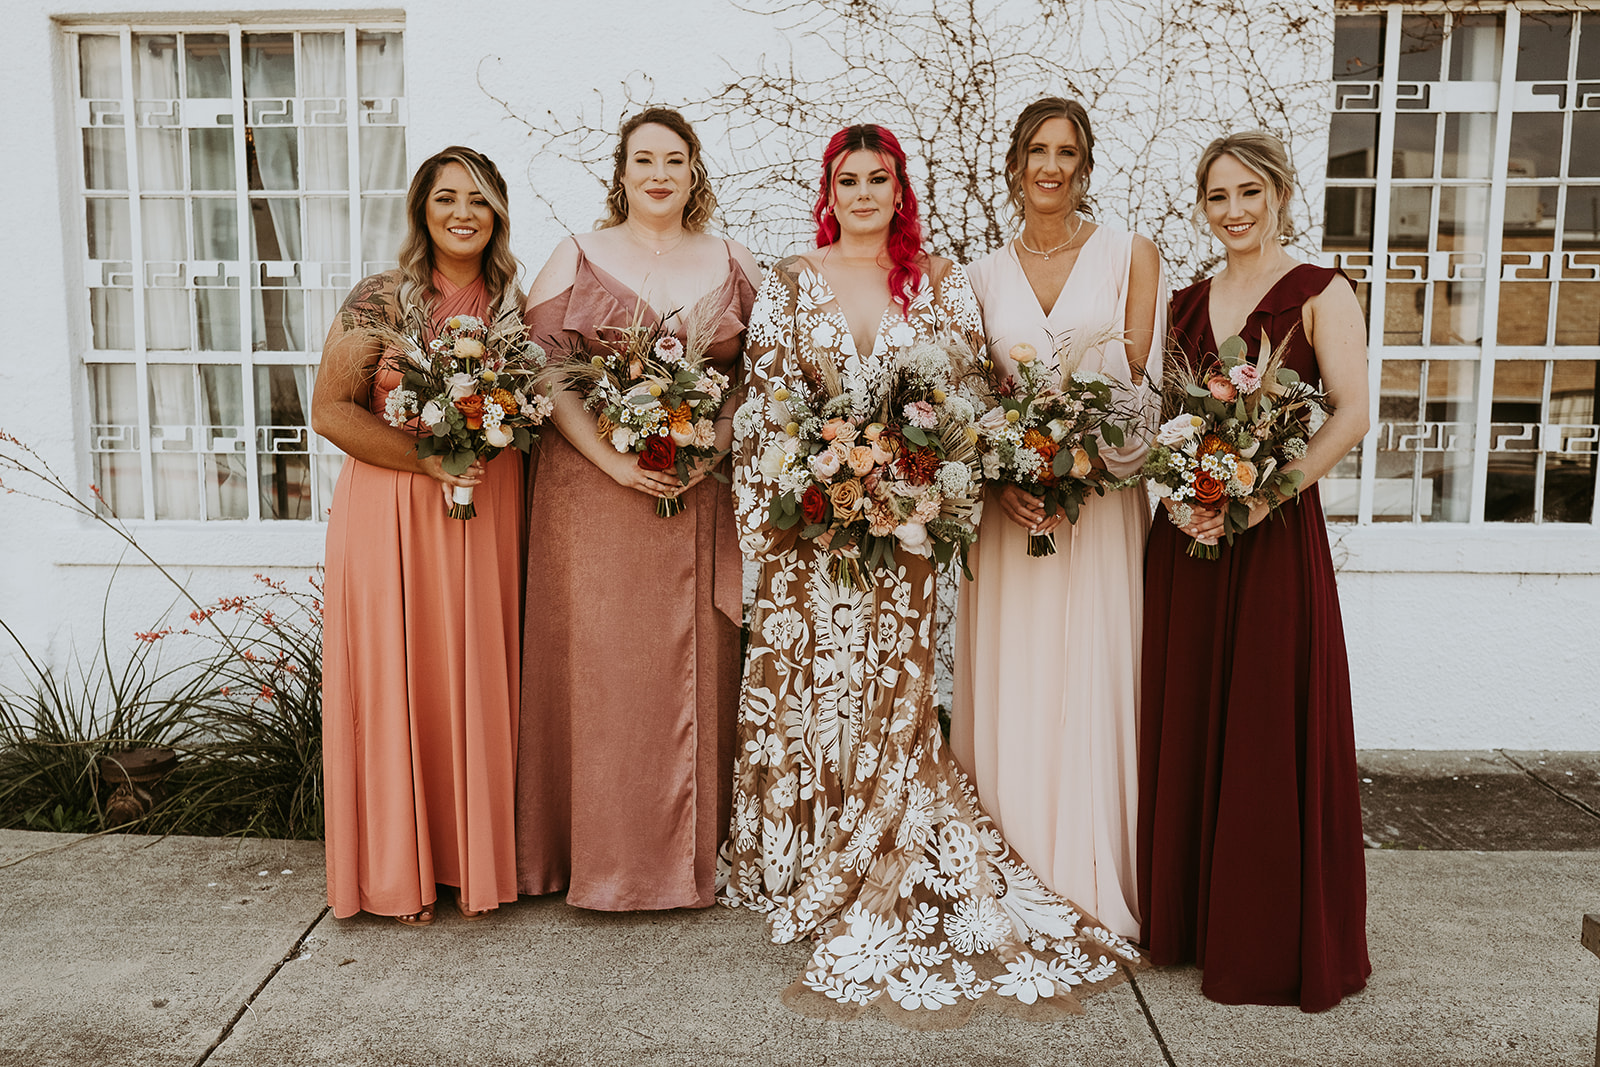 Bride and Bridesmaids holding wedding bouquets